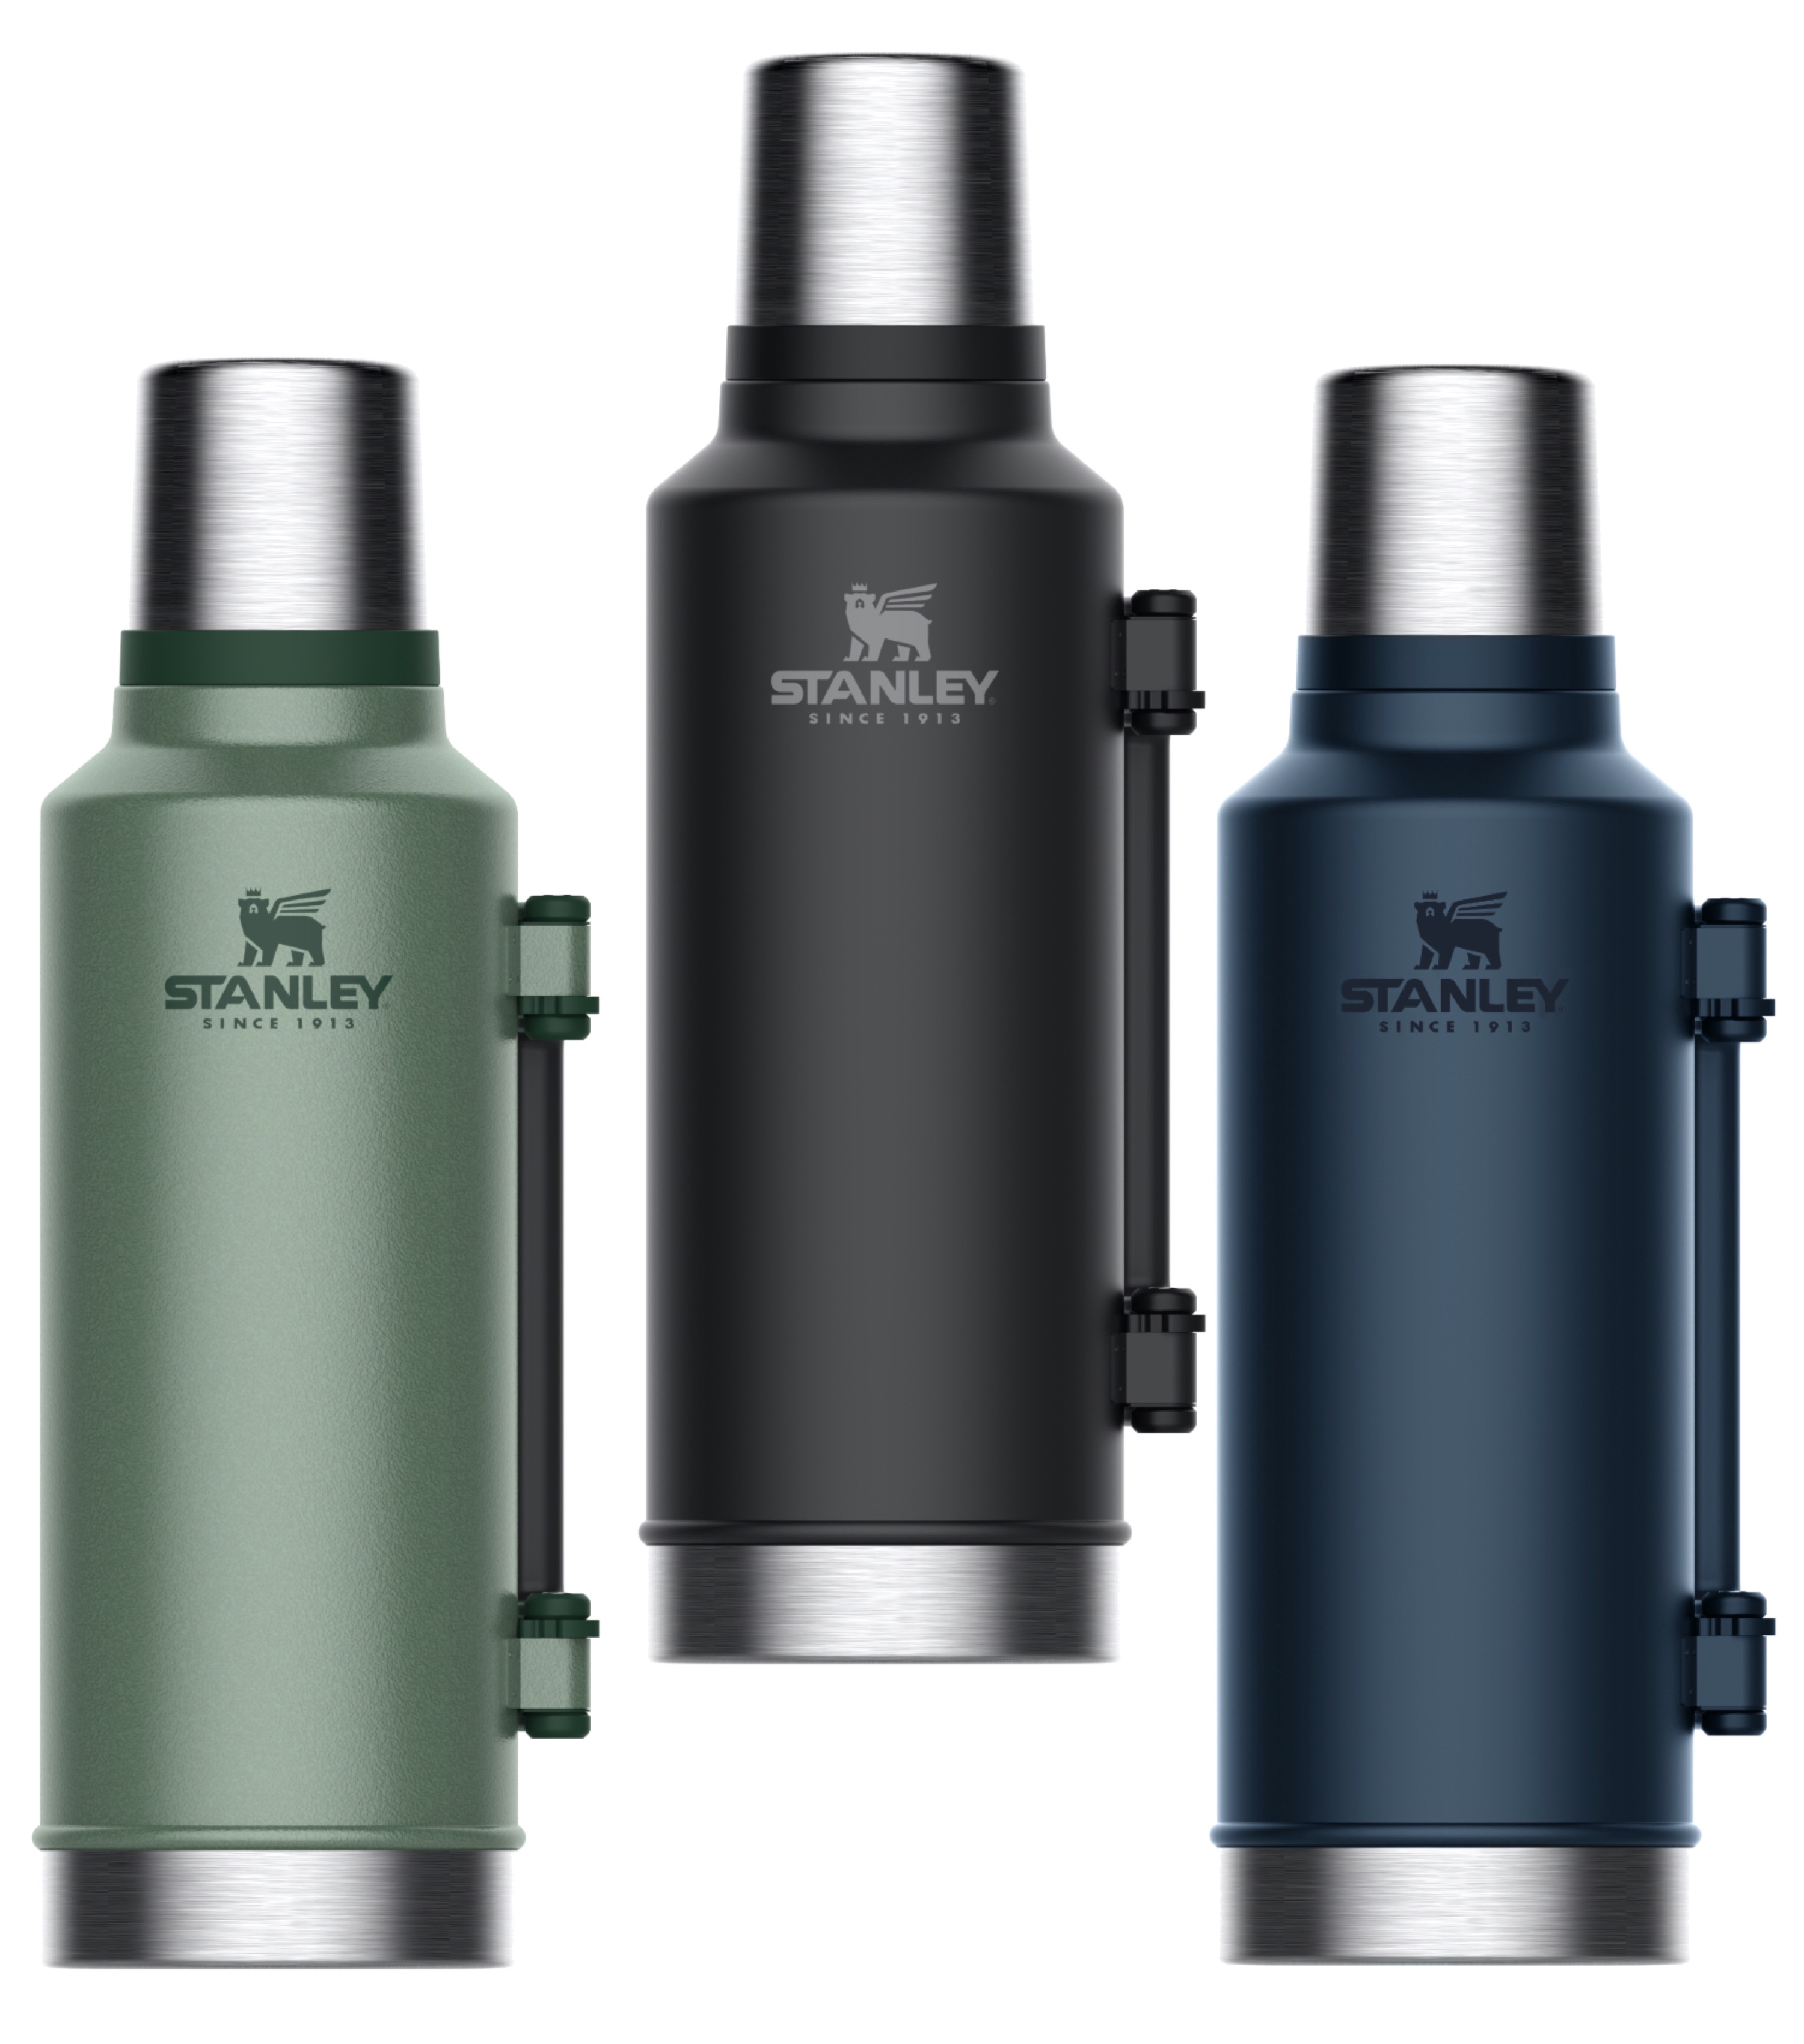 http://www.traveluniverse.com.au/Shared/Images/Product/Stanley-Classic-1-9-Litre-Vacuum-Insulated-Bottle/88422-group.jpg